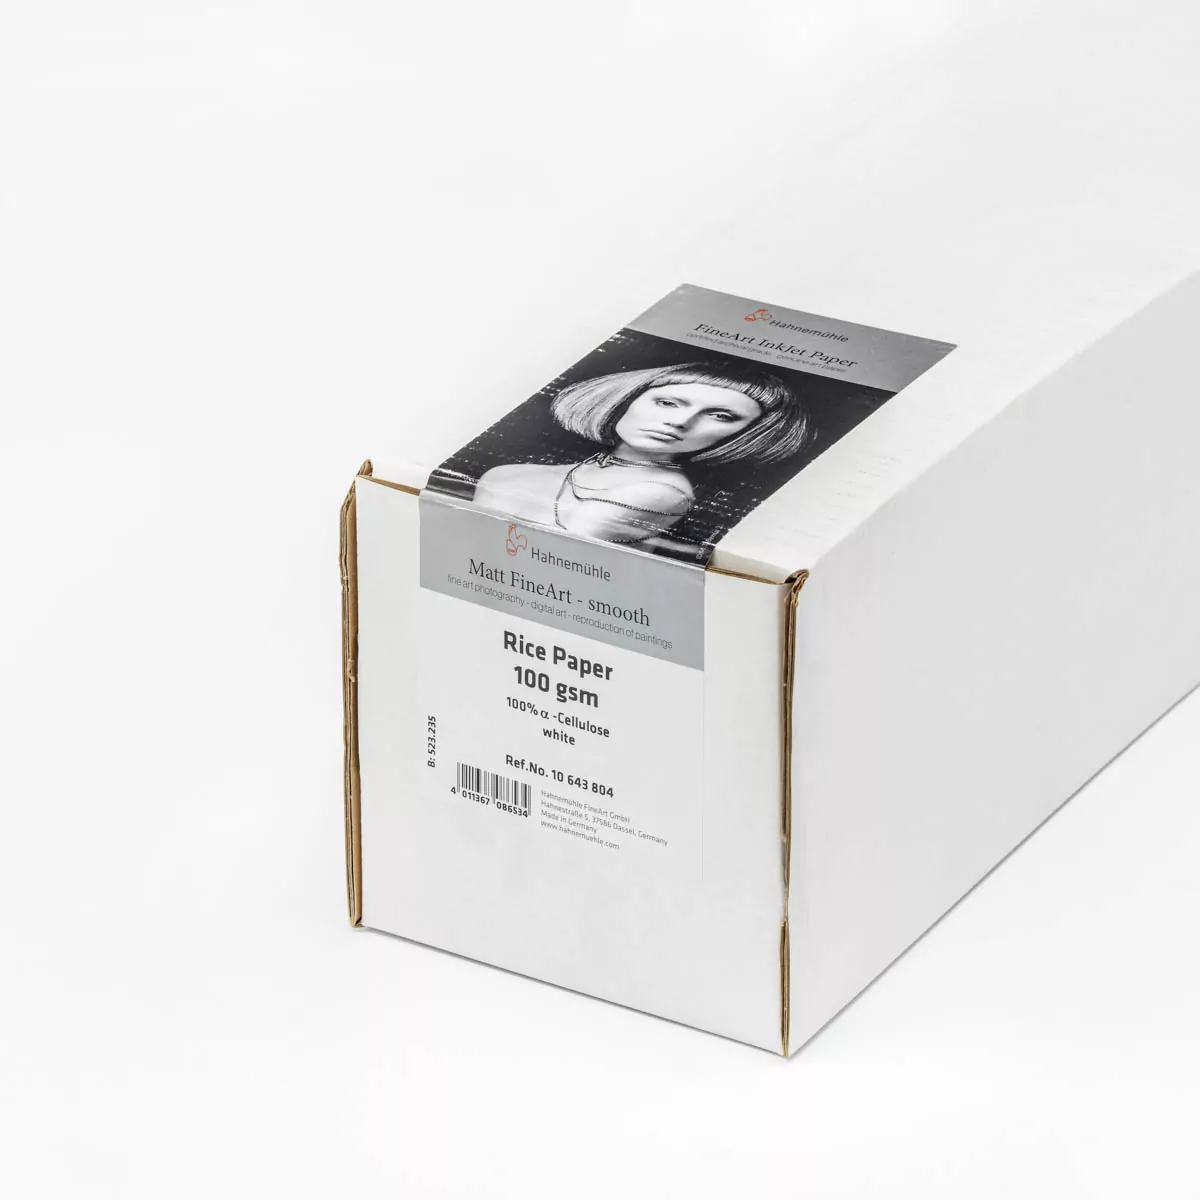 Hahnemuhle Rice Paper 100gsm 24”(61cm)x30m roll